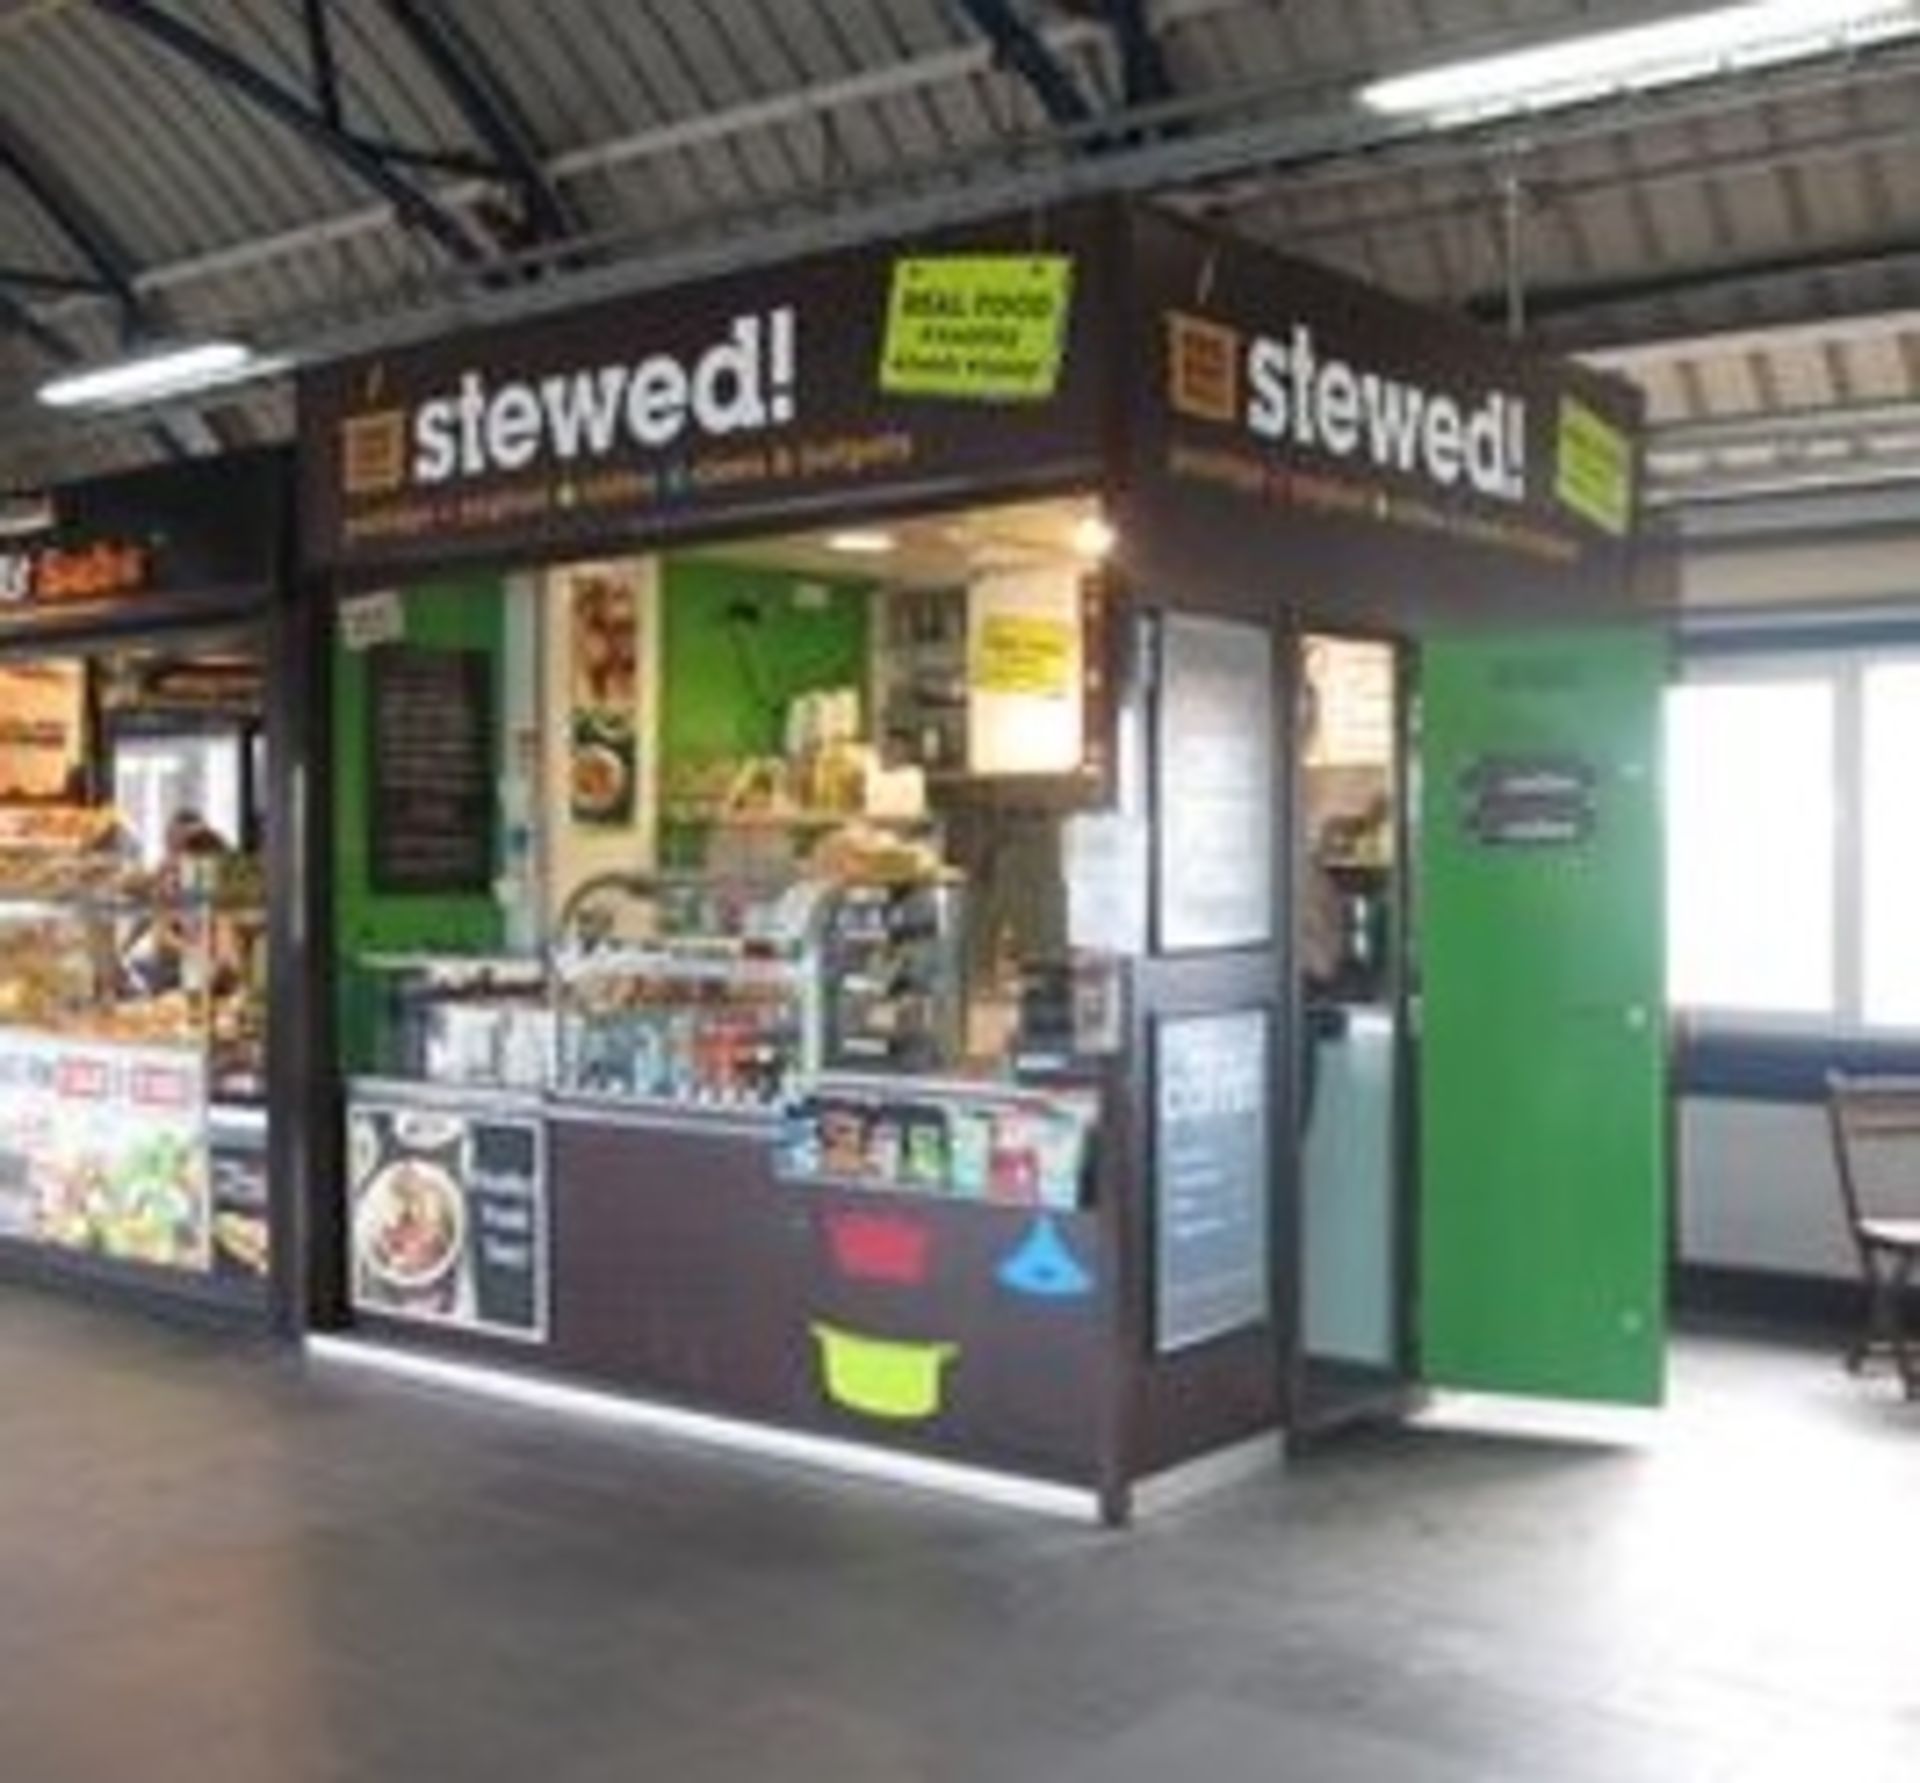 AJC Retail Solutions - Stewed Food and Coffee Kiosk - Complete Business Opportunity! - Image 24 of 25